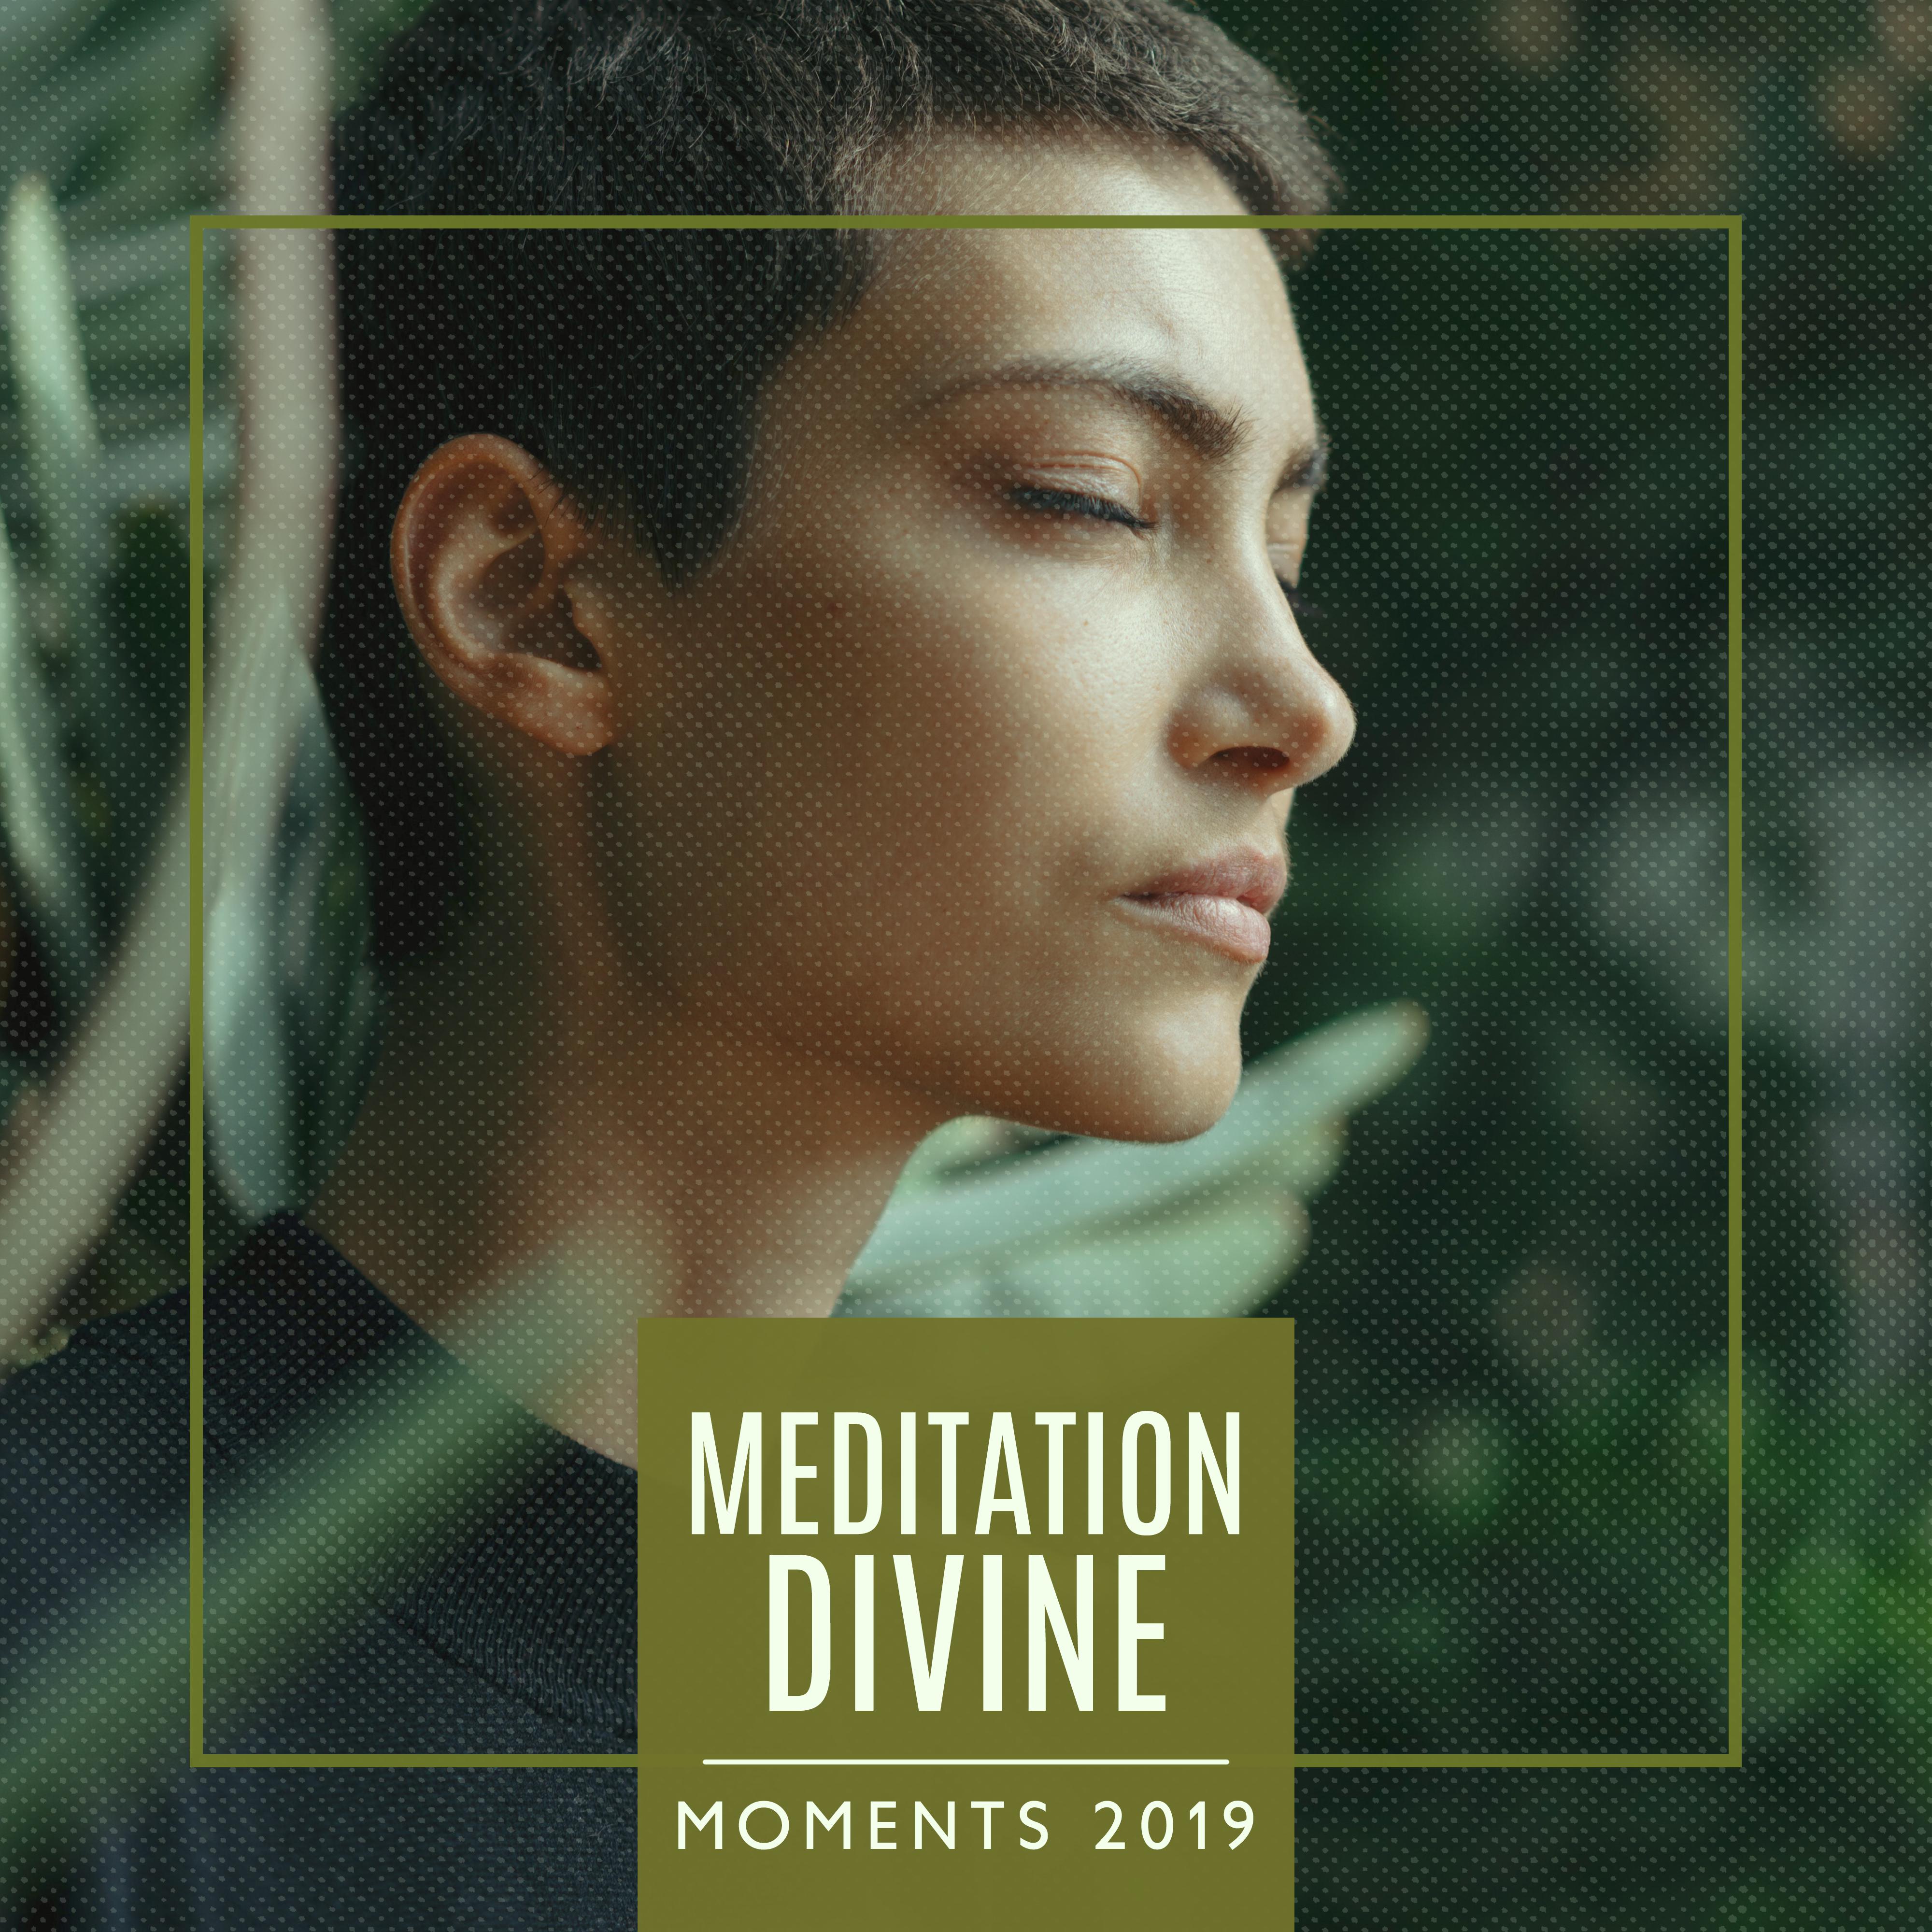 Meditation Divine Moments 2019 – Best 15 New Age Tracks for Pure Yoga & Deep Relaxation, Spiritual Connection Impreove, Balancing Chakra, Zen Healing, Mindful Journey